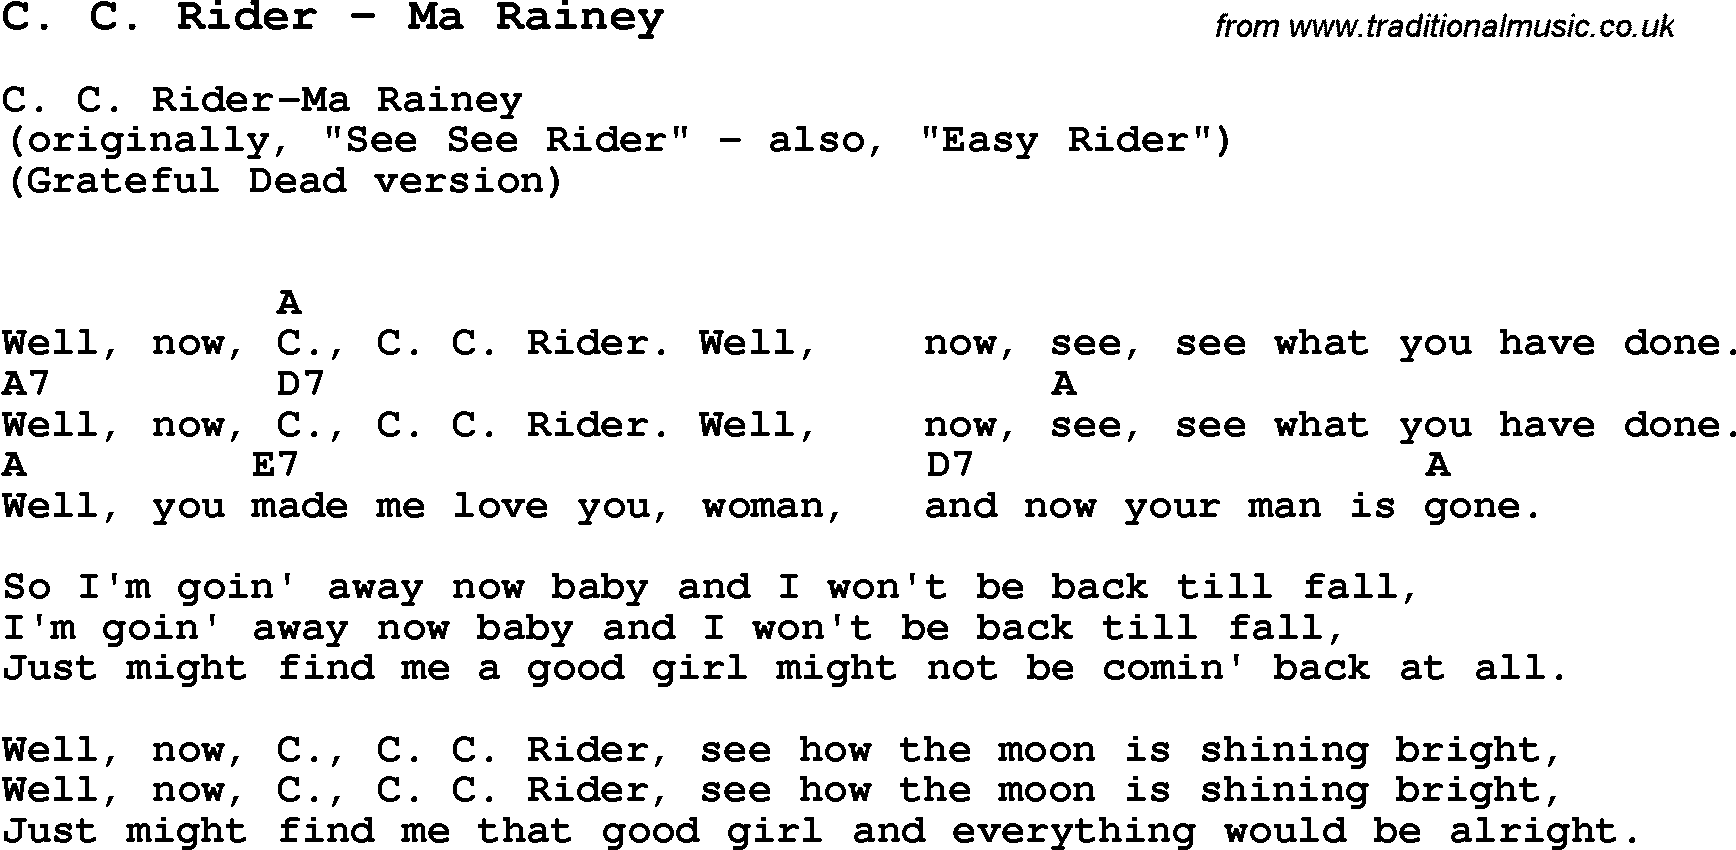 Song C. C. Rider by Ma Rainey, with lyrics for vocal performance and accompaniment chords for Ukulele, Guitar Banjo etc.